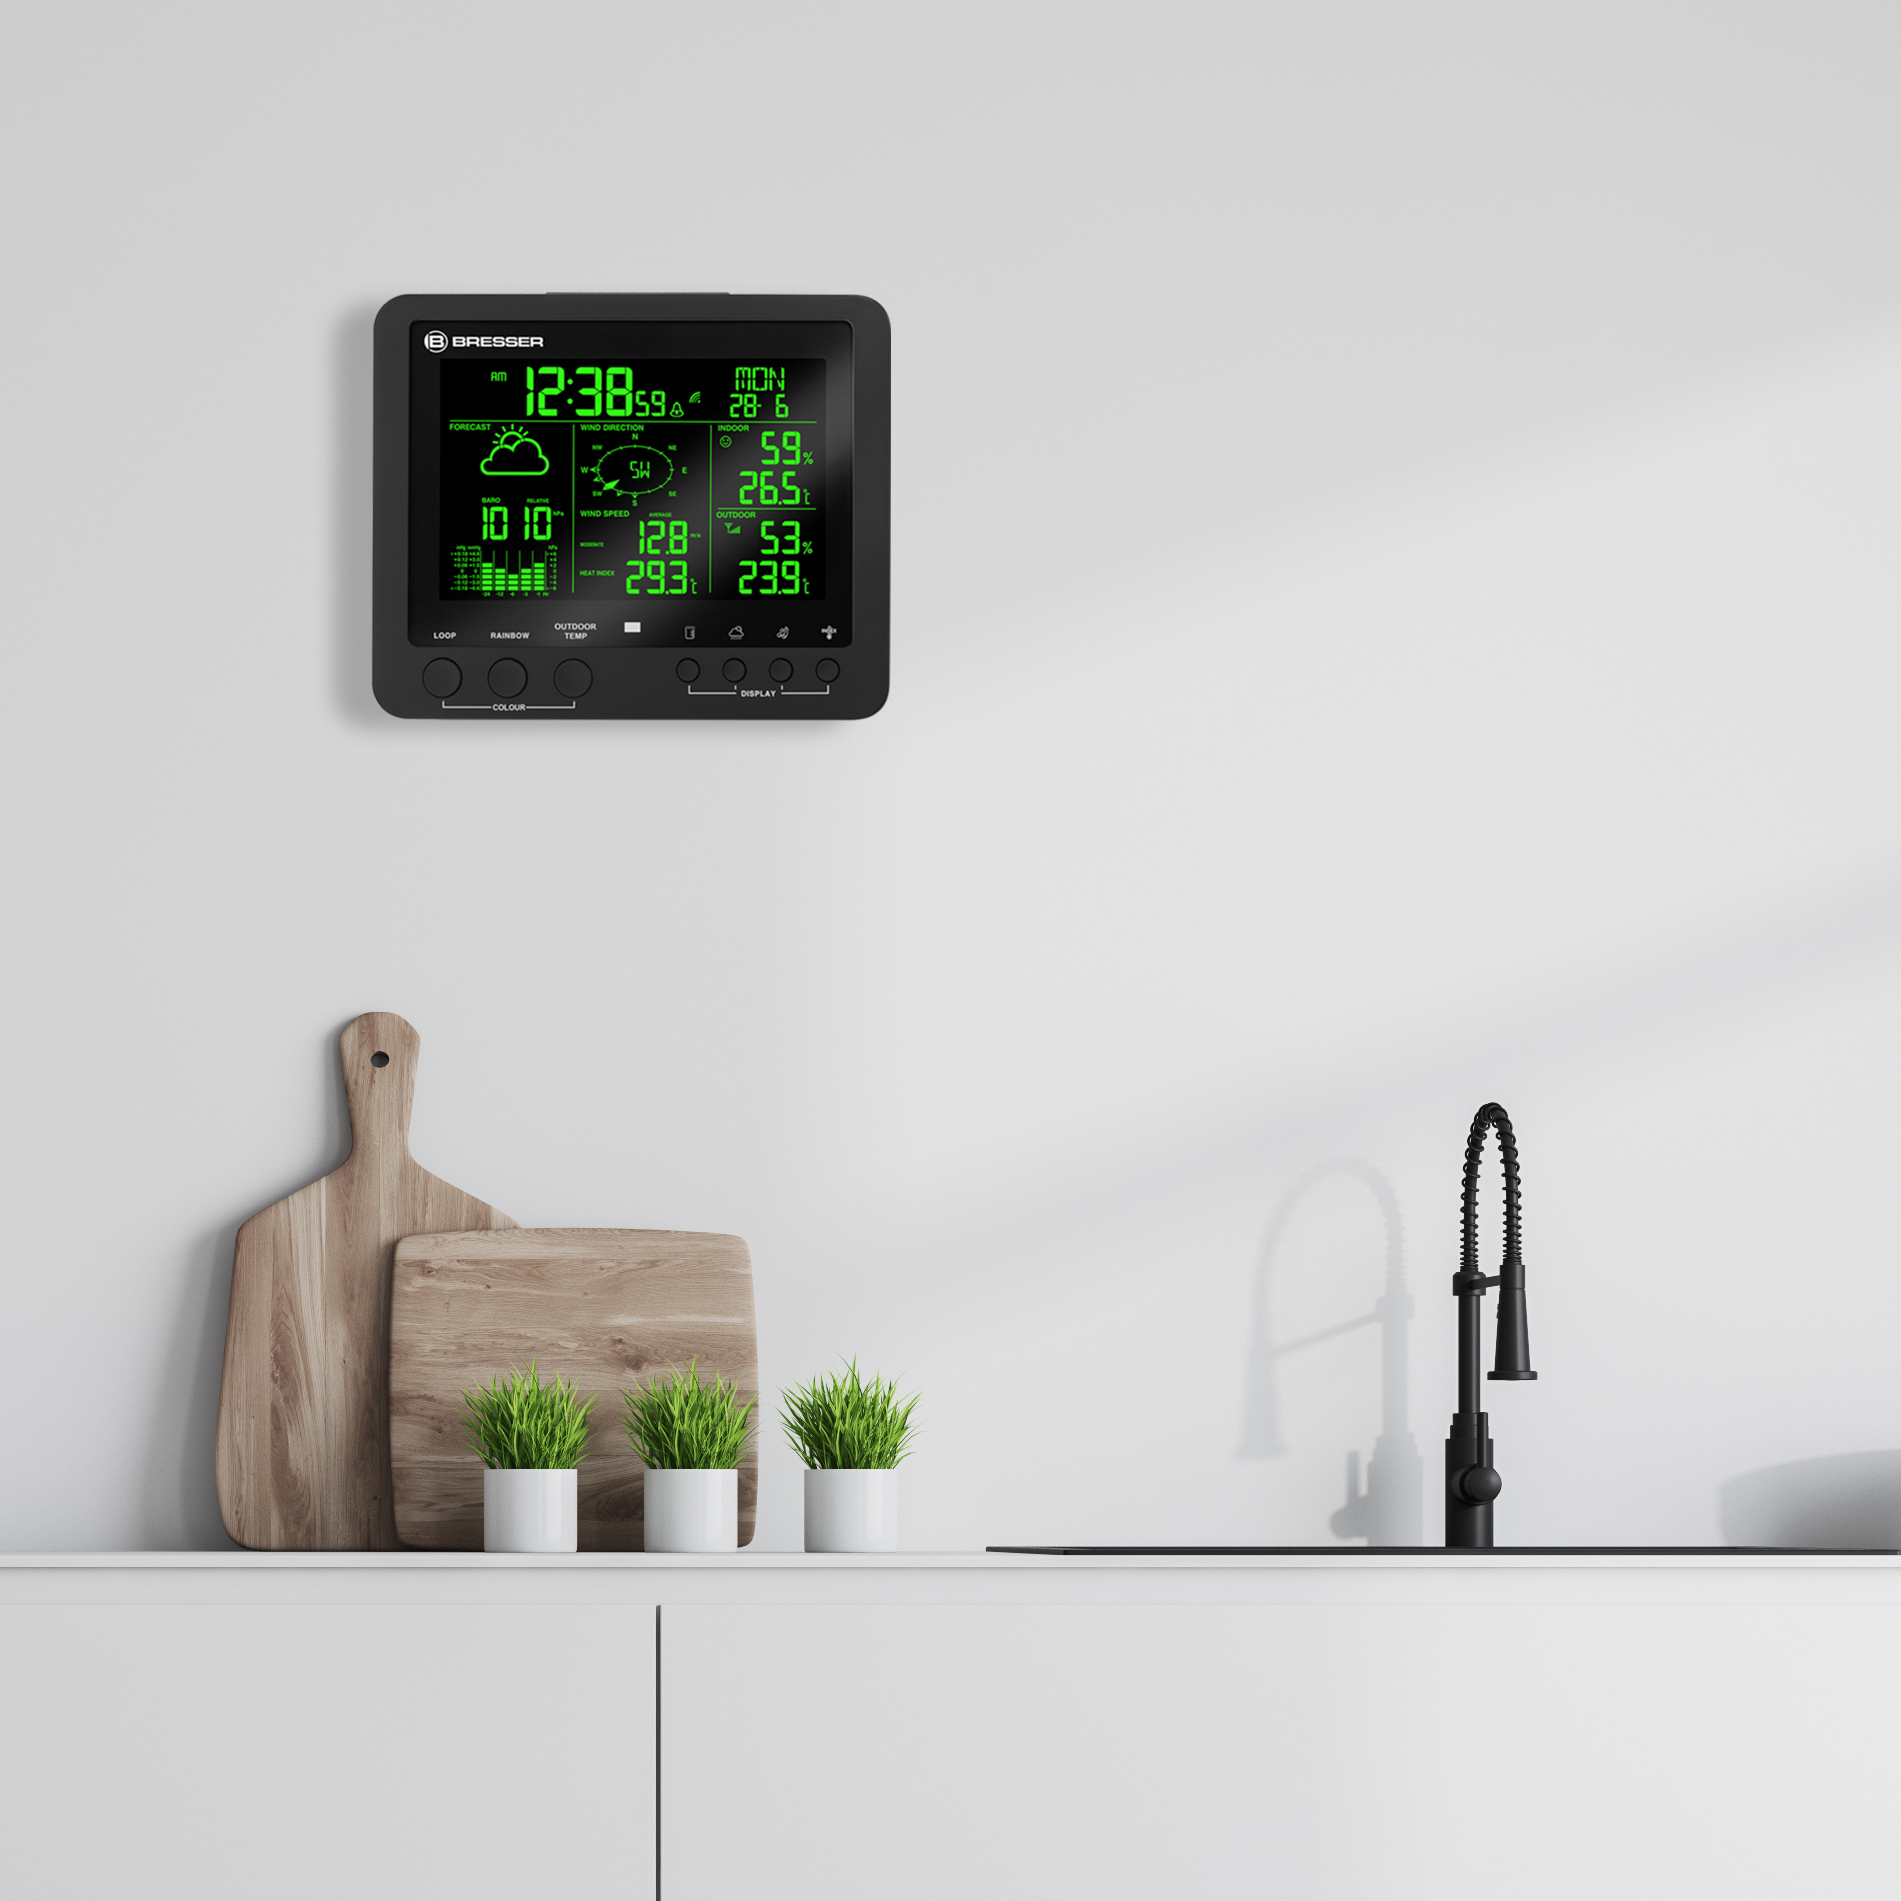 BRESSER 5-in-1 Professional Weather Station with colour change